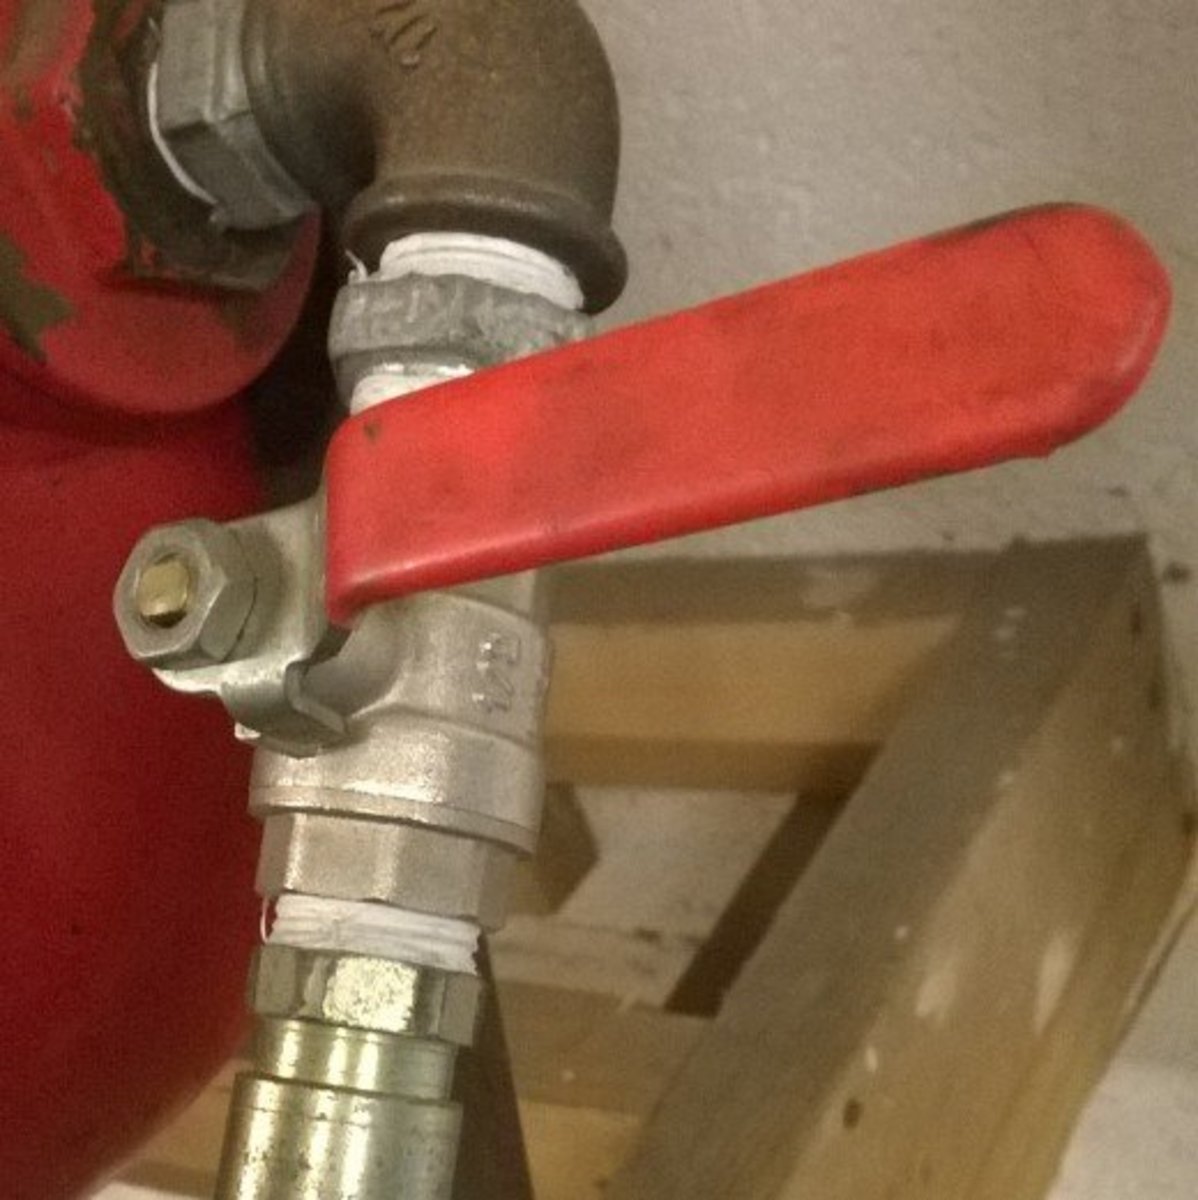 Quadrant or ball valve. This is off when the handle is perpendicular or 90 degrees to the pipe